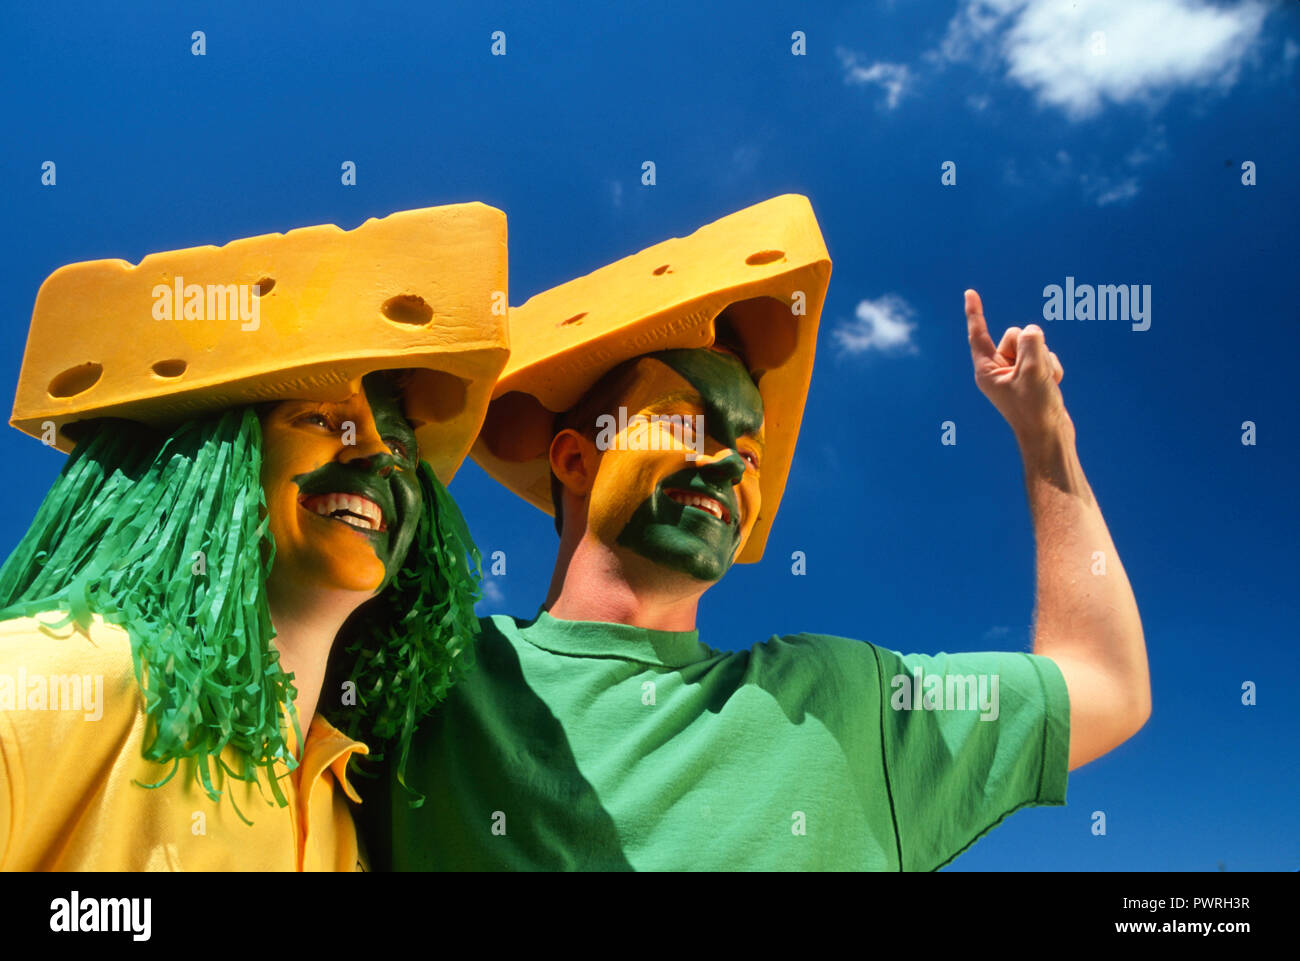 https://c8.alamy.com/comp/PWRH3R/enthusiastic-cheesehead-sports-fans-with-painted-faces-at-a-football-game-usa-PWRH3R.jpg